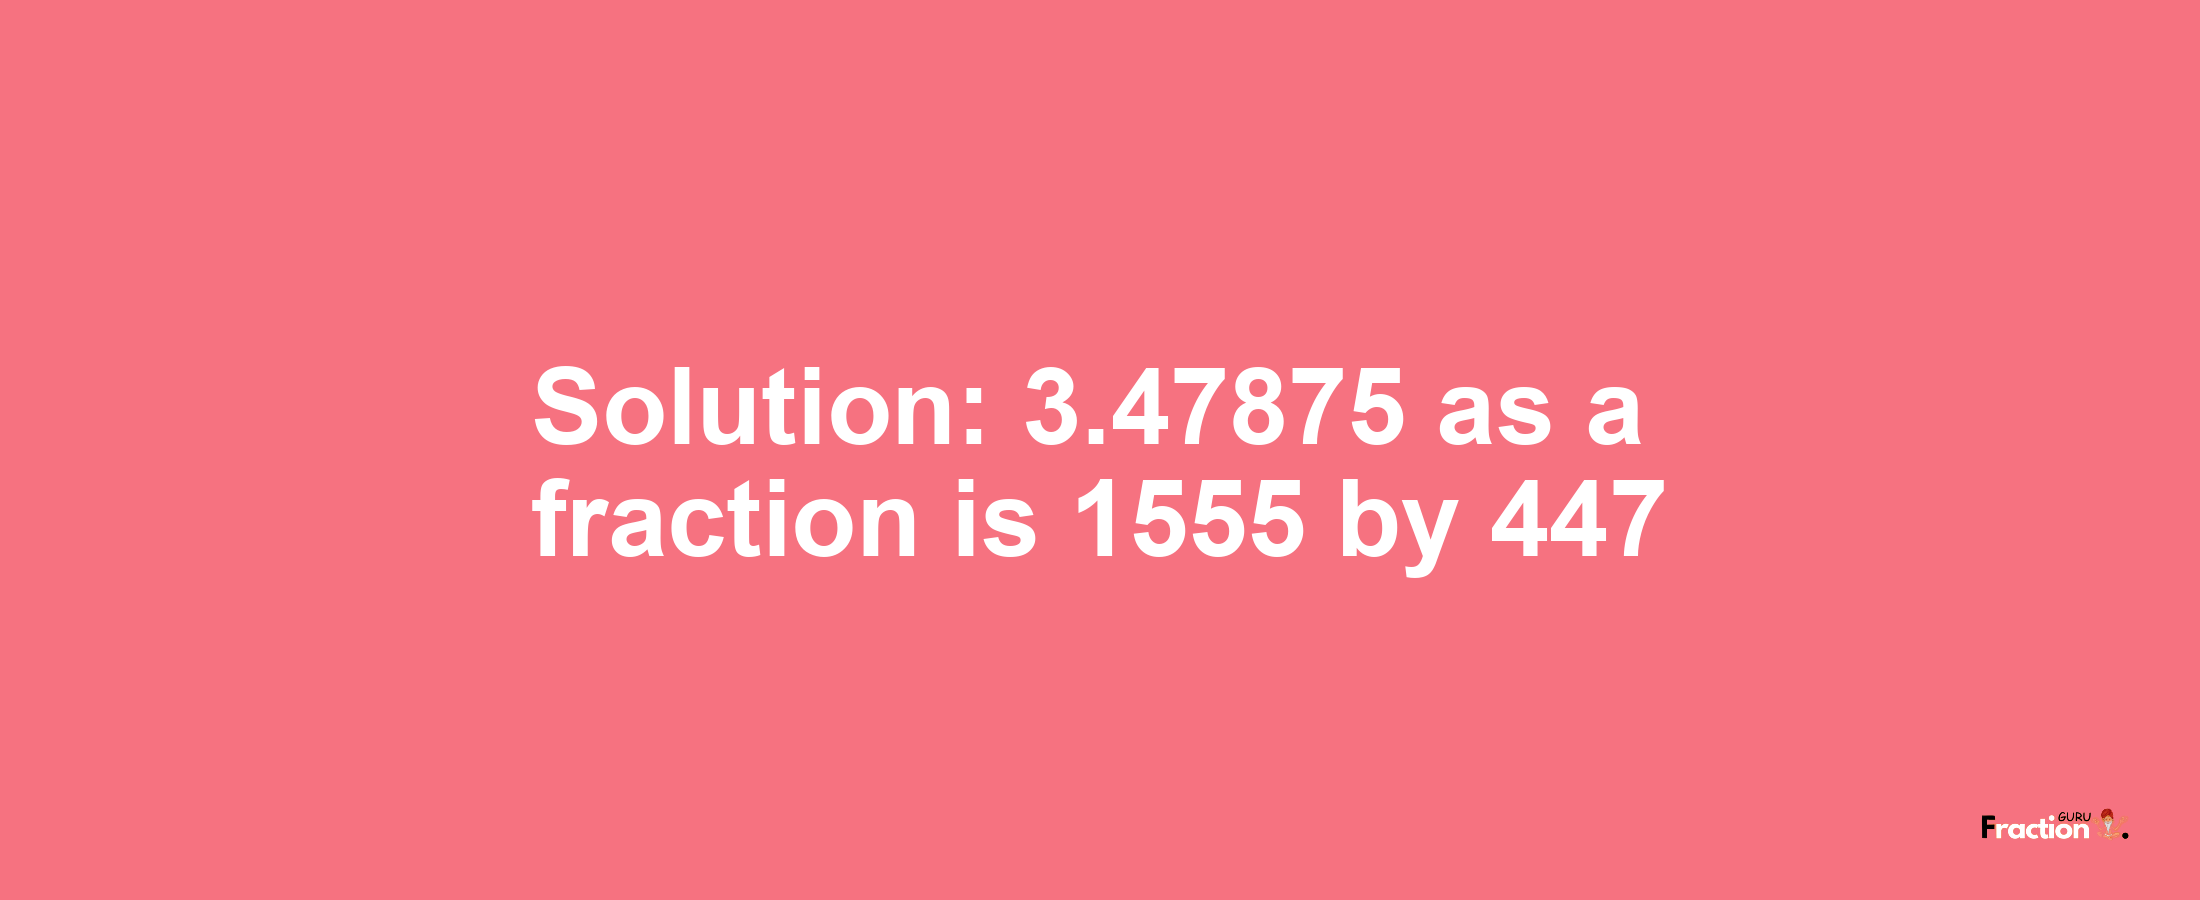 Solution:3.47875 as a fraction is 1555/447